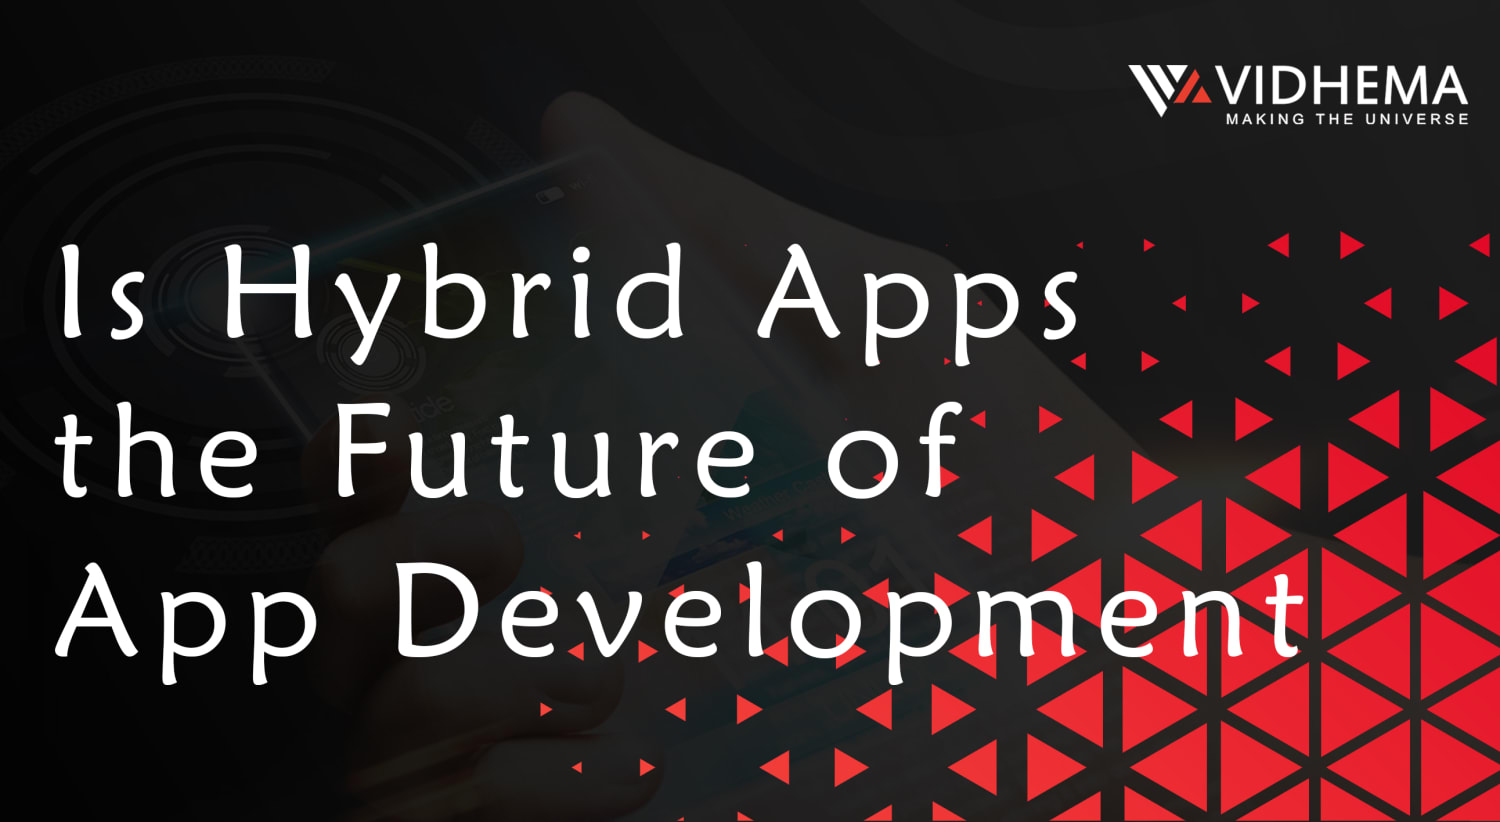 Is Hybrid Apps the Future of App Development